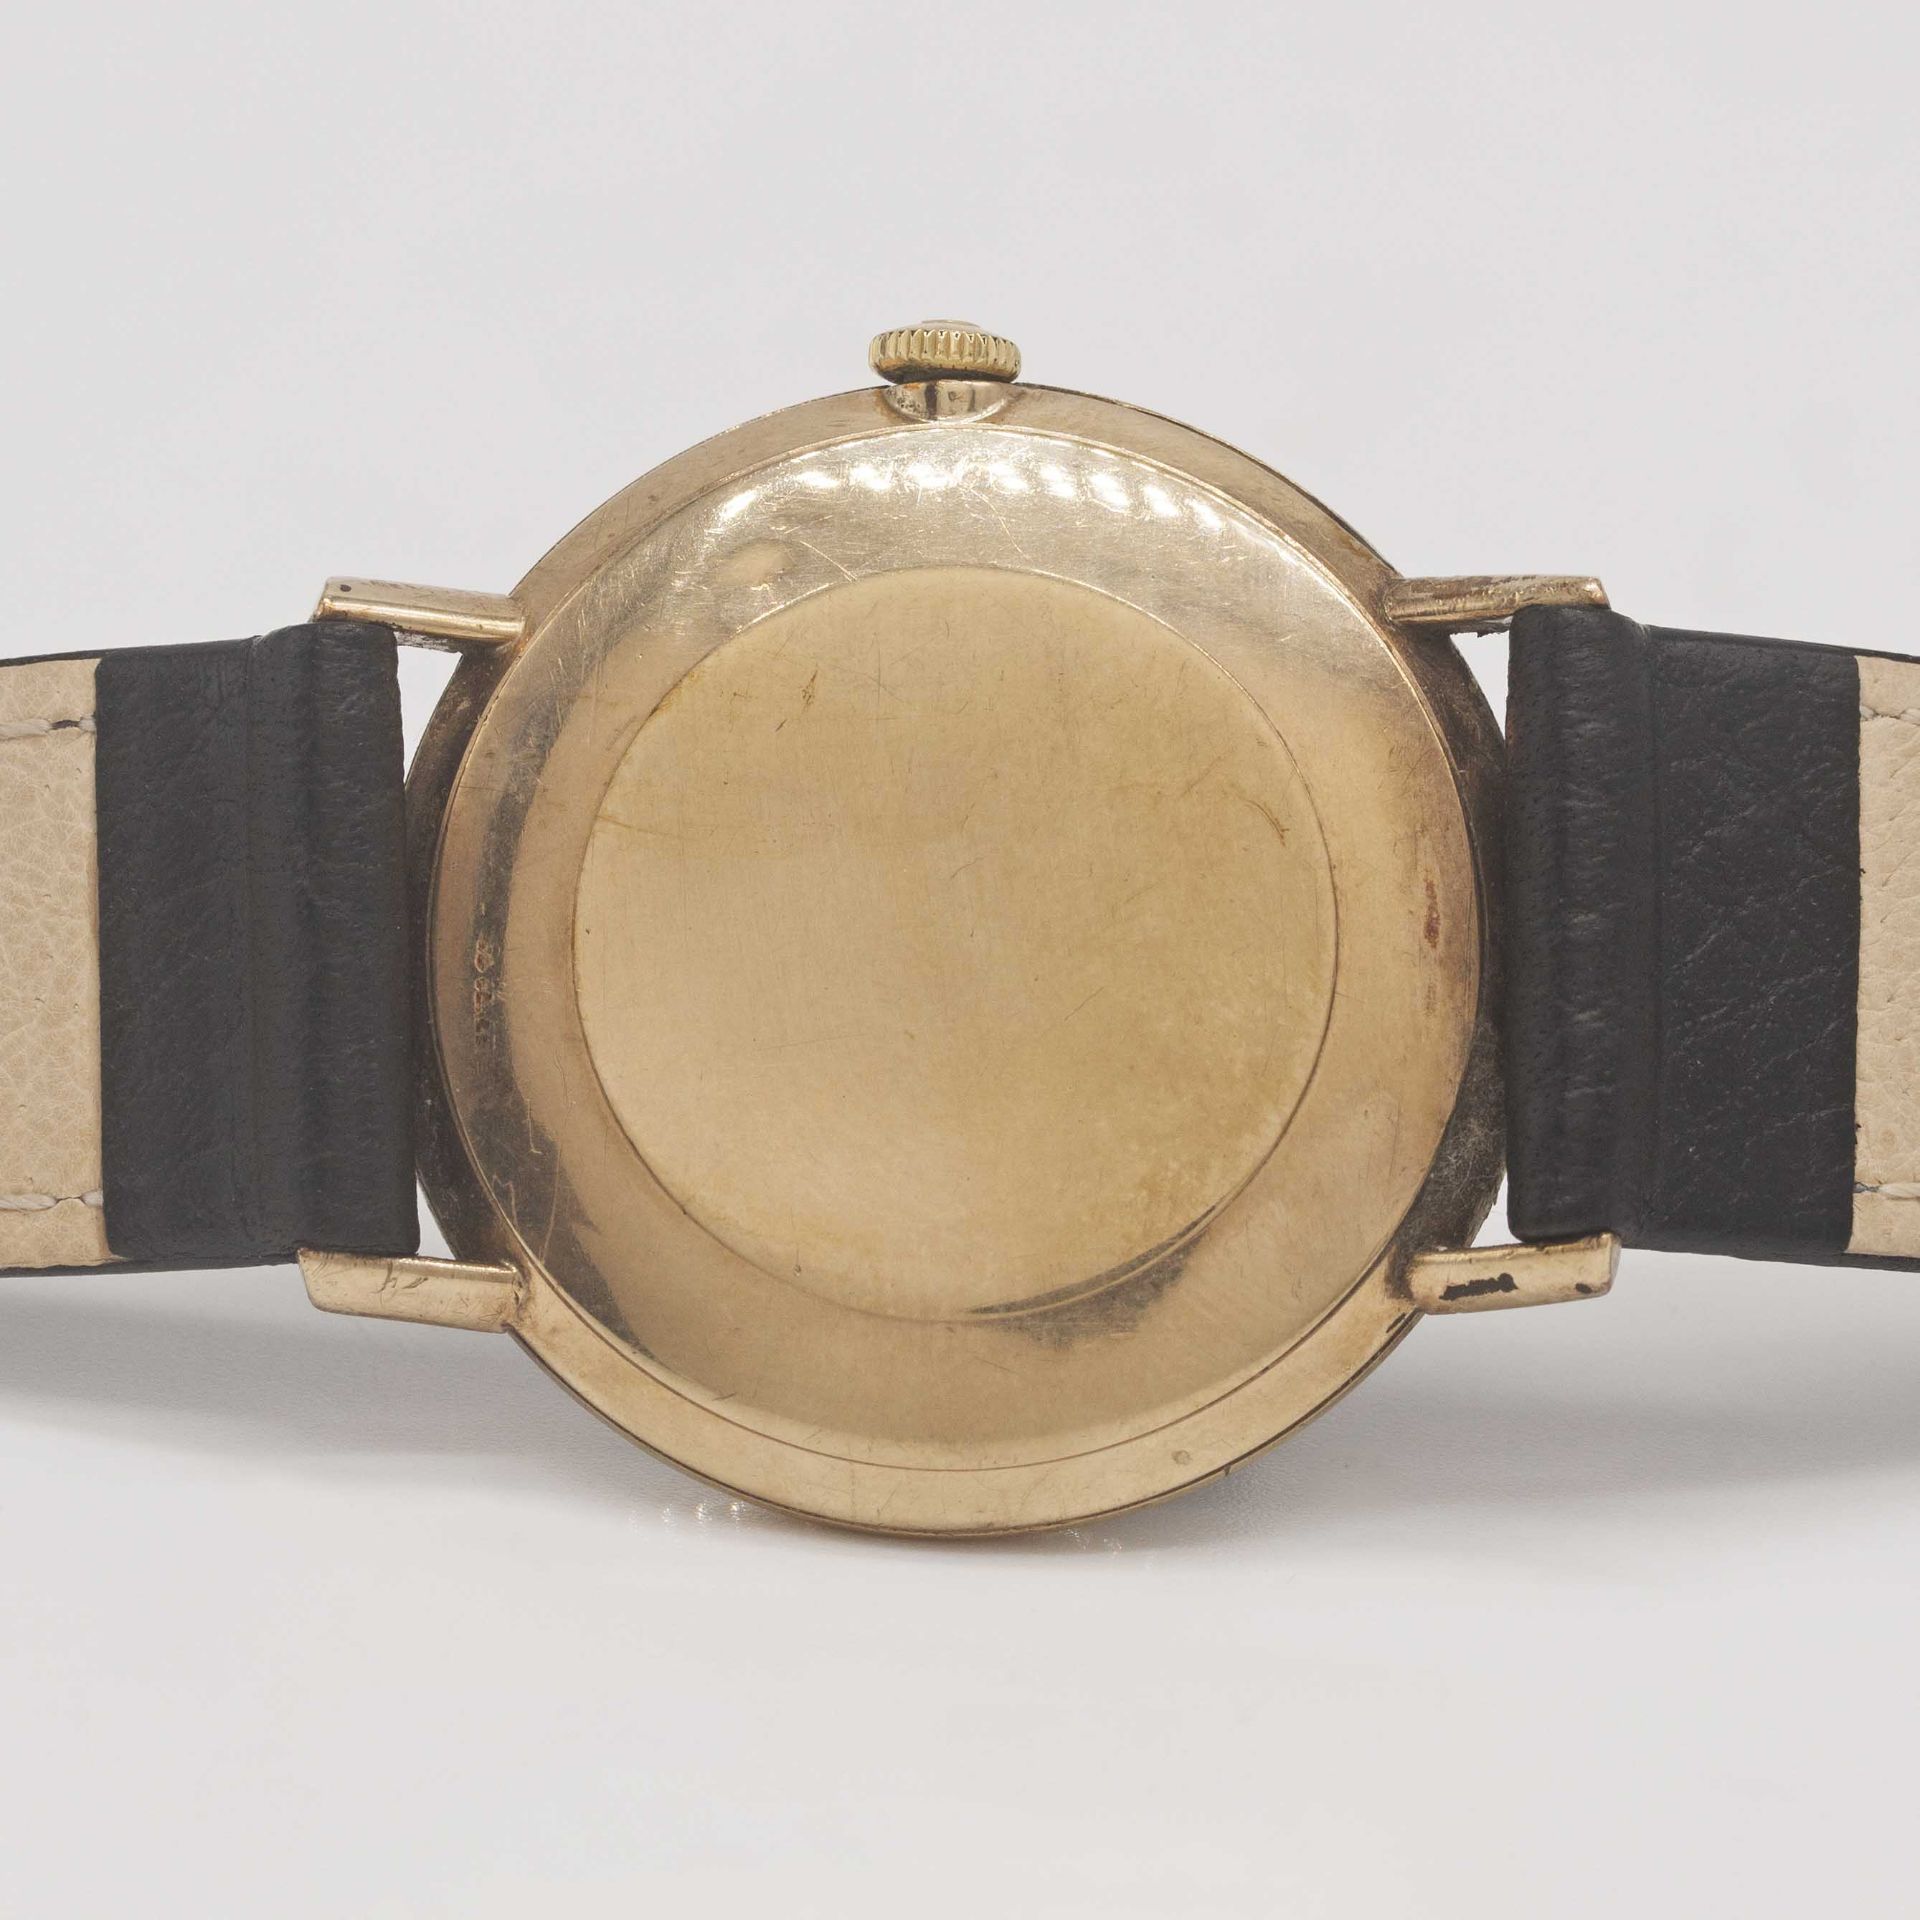 A GENTLEMAN'S 9CT SOLID GOLD OMEGA WRIST WATCH CIRCA 1960s, WITH GREY DIAL Movement: Manual wind, - Image 6 of 8